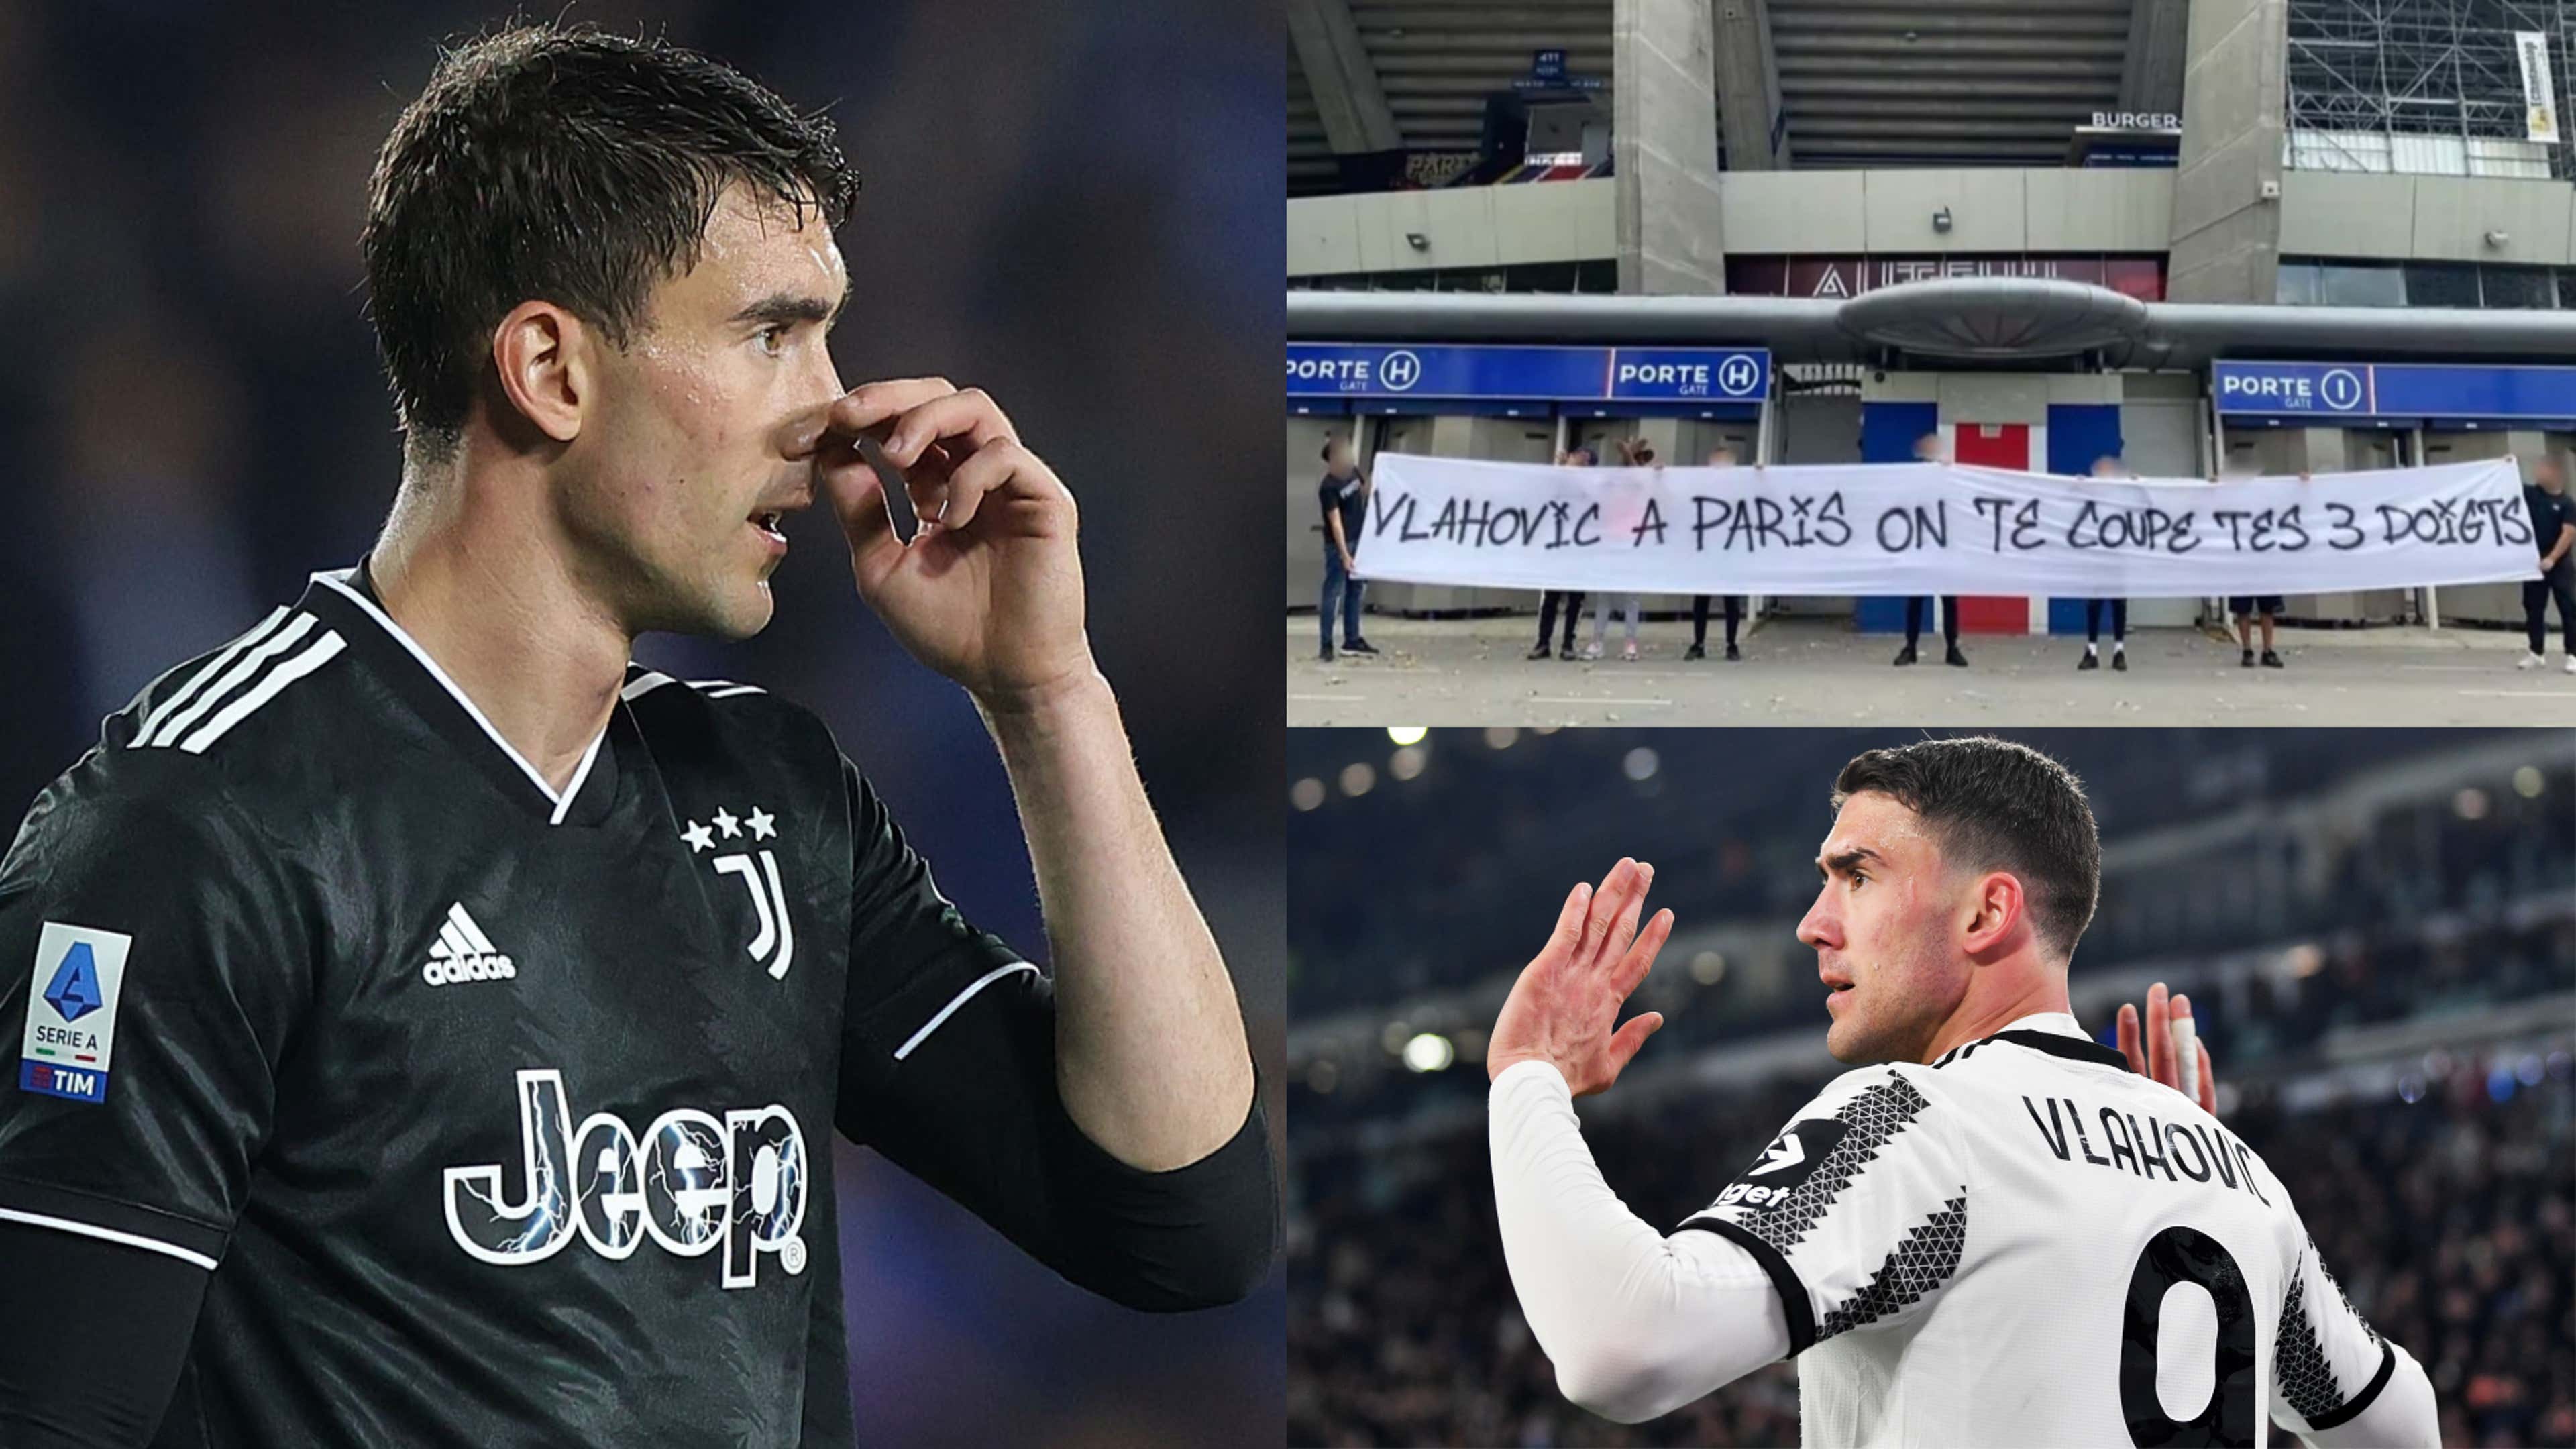 Cut off three fingers' - Dusan Vlahovic sent chilling transfer warning by PSG ultras amid talk of move from Juventus | Goal.com